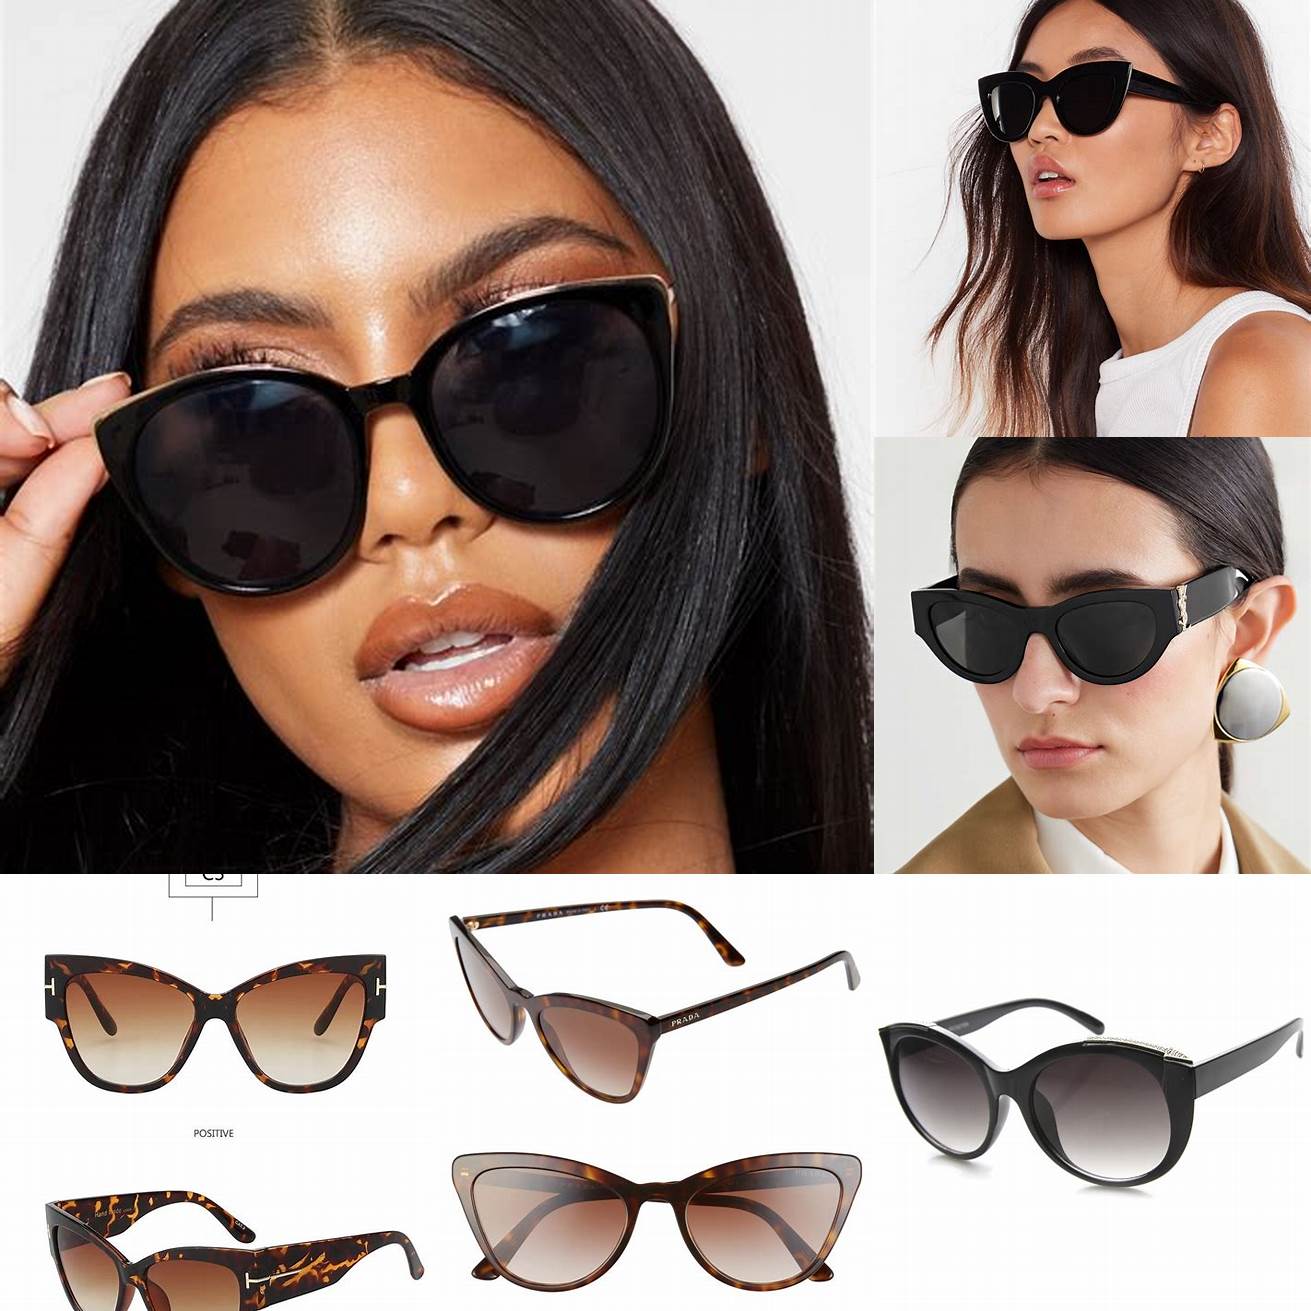 4 Oversized Cat Eye Sunglasses with Gradient Lens